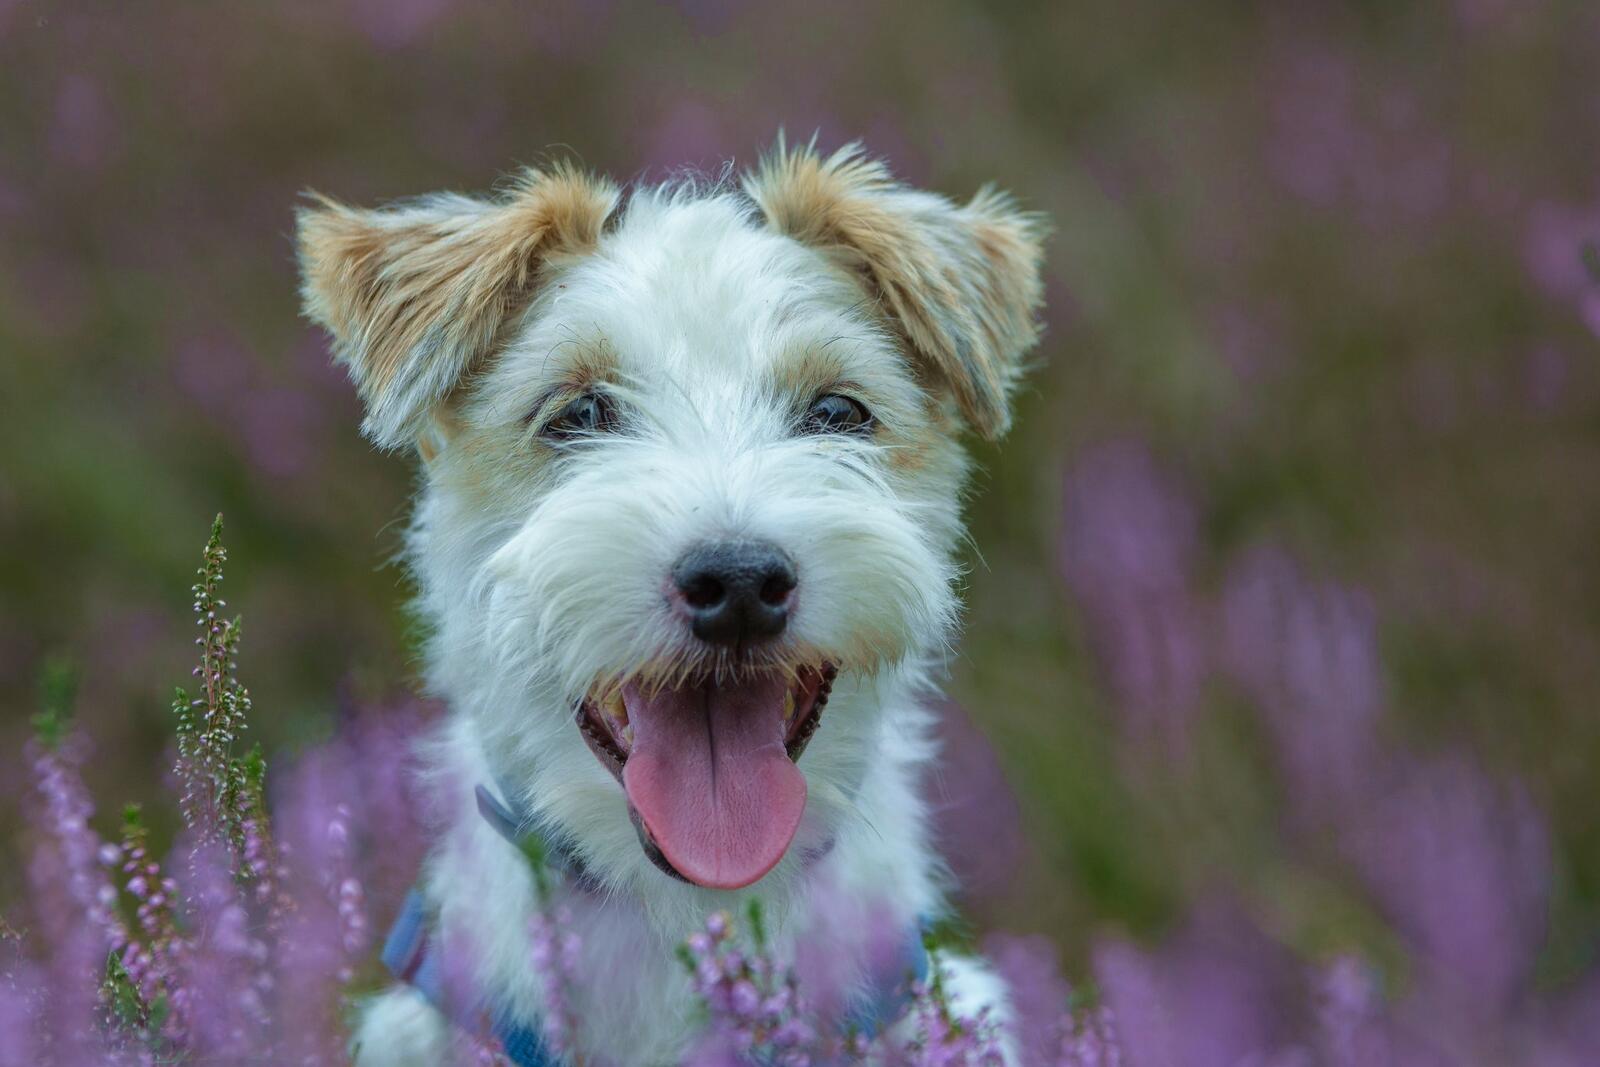 Wallpapers cute dog wallpaper jack russell terrier dogs on the desktop